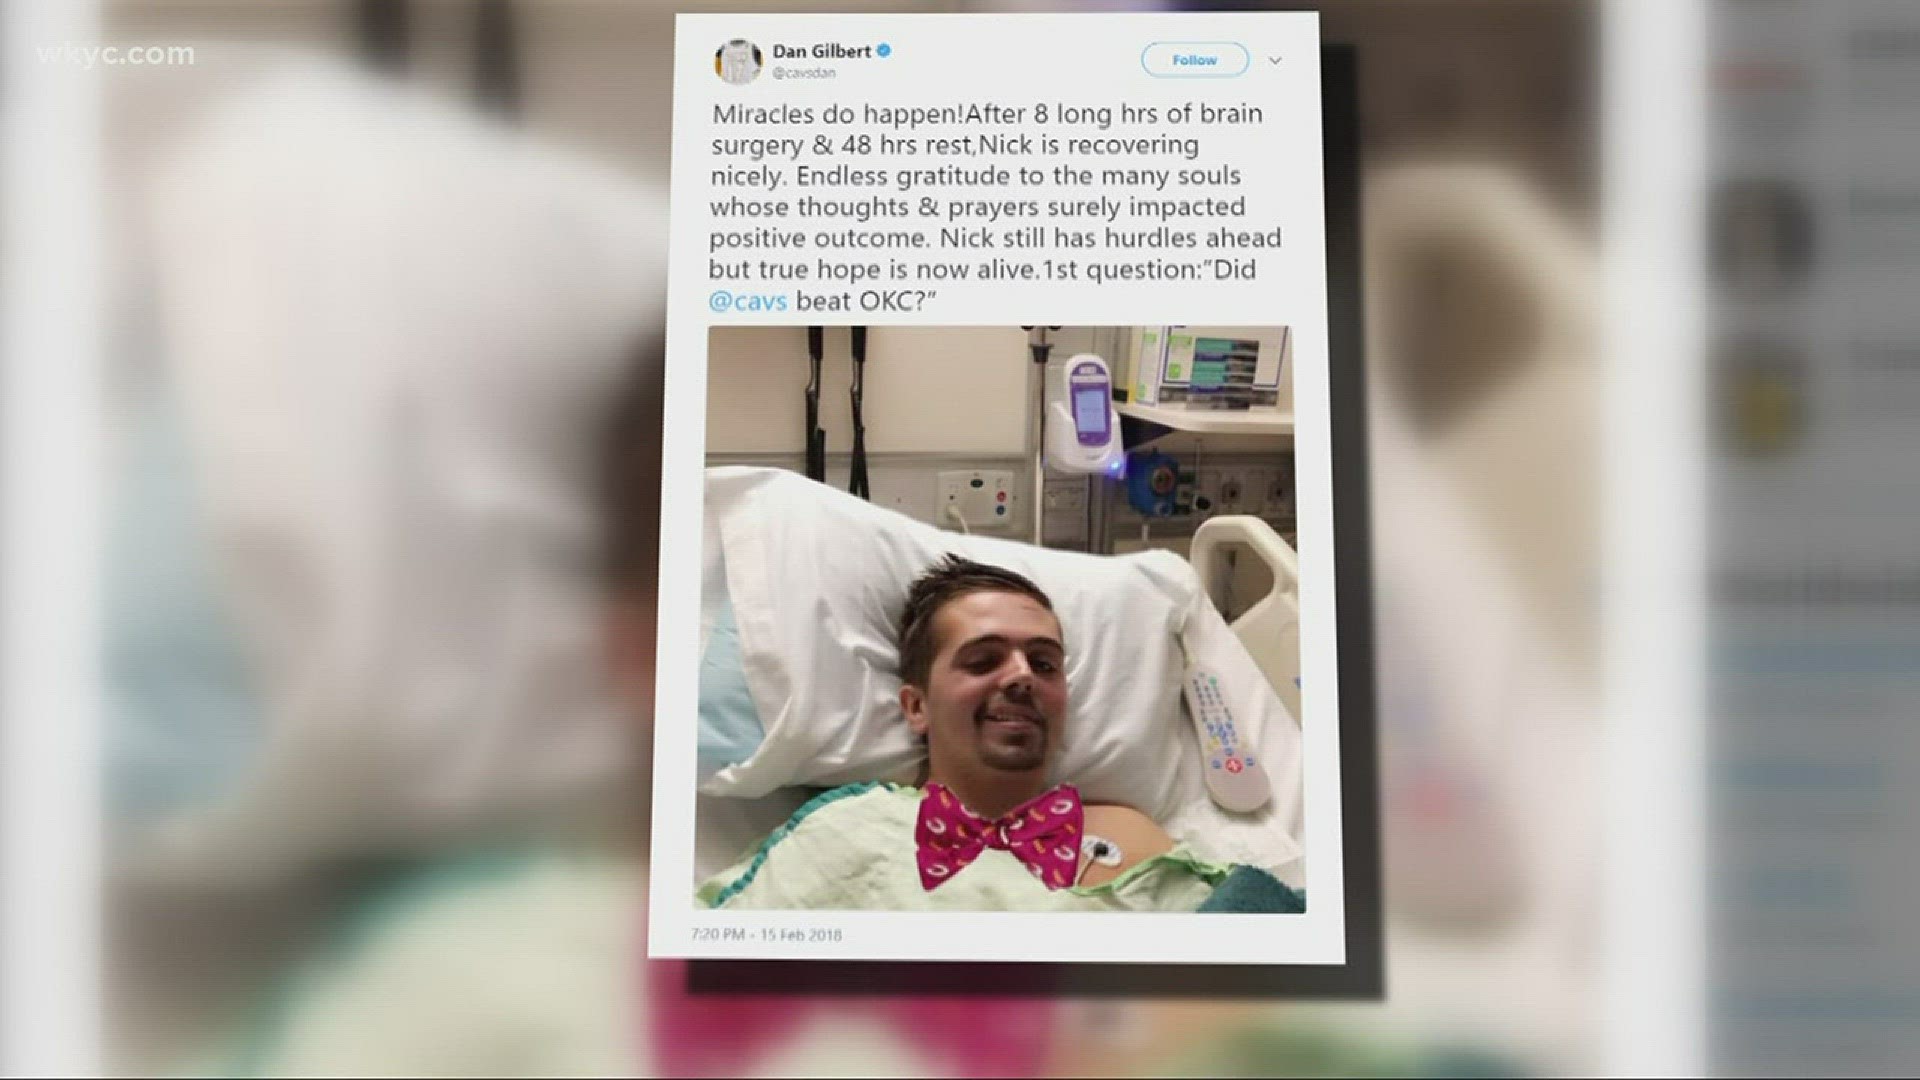 March 15, 2018: Dan Gilbert, the Cleveland Cavaliers owner tweeted that his 21-year-old son, Nick, is now home resting after 38 days at Henry Ford Hospital in Detroit.